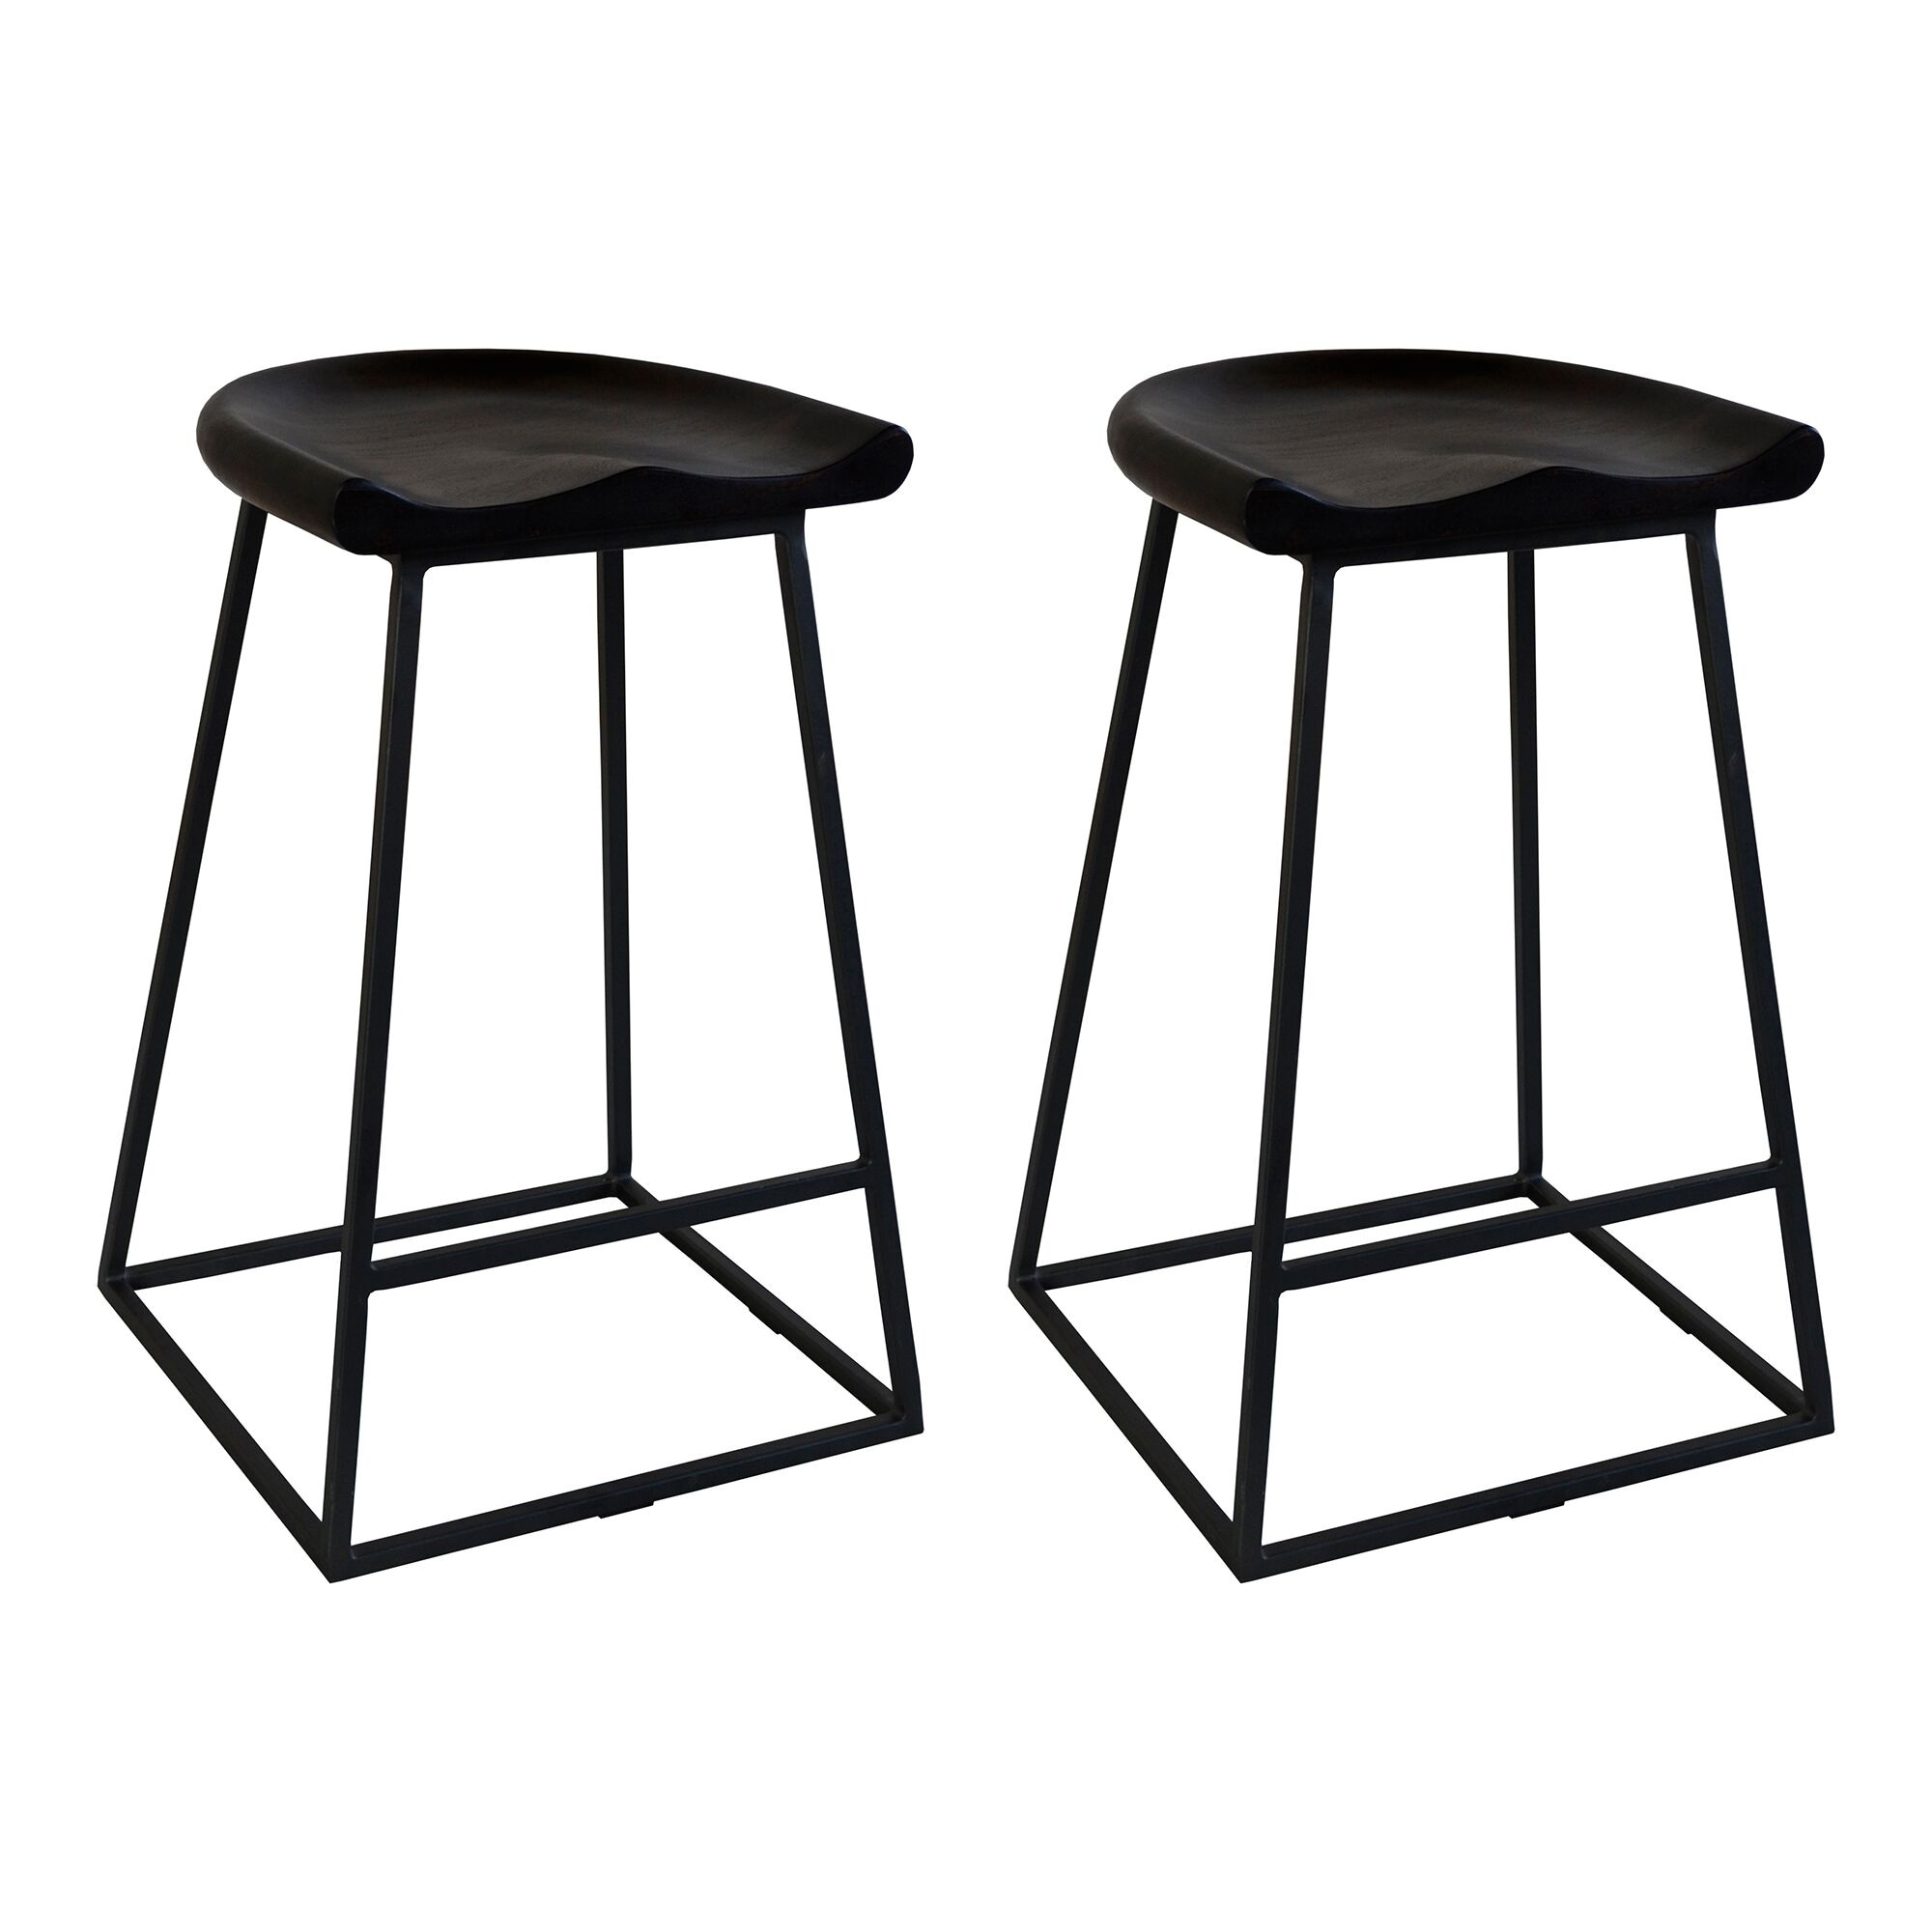 Aurelle Home Solid Industrial Stools (Set of 2) - Counter height